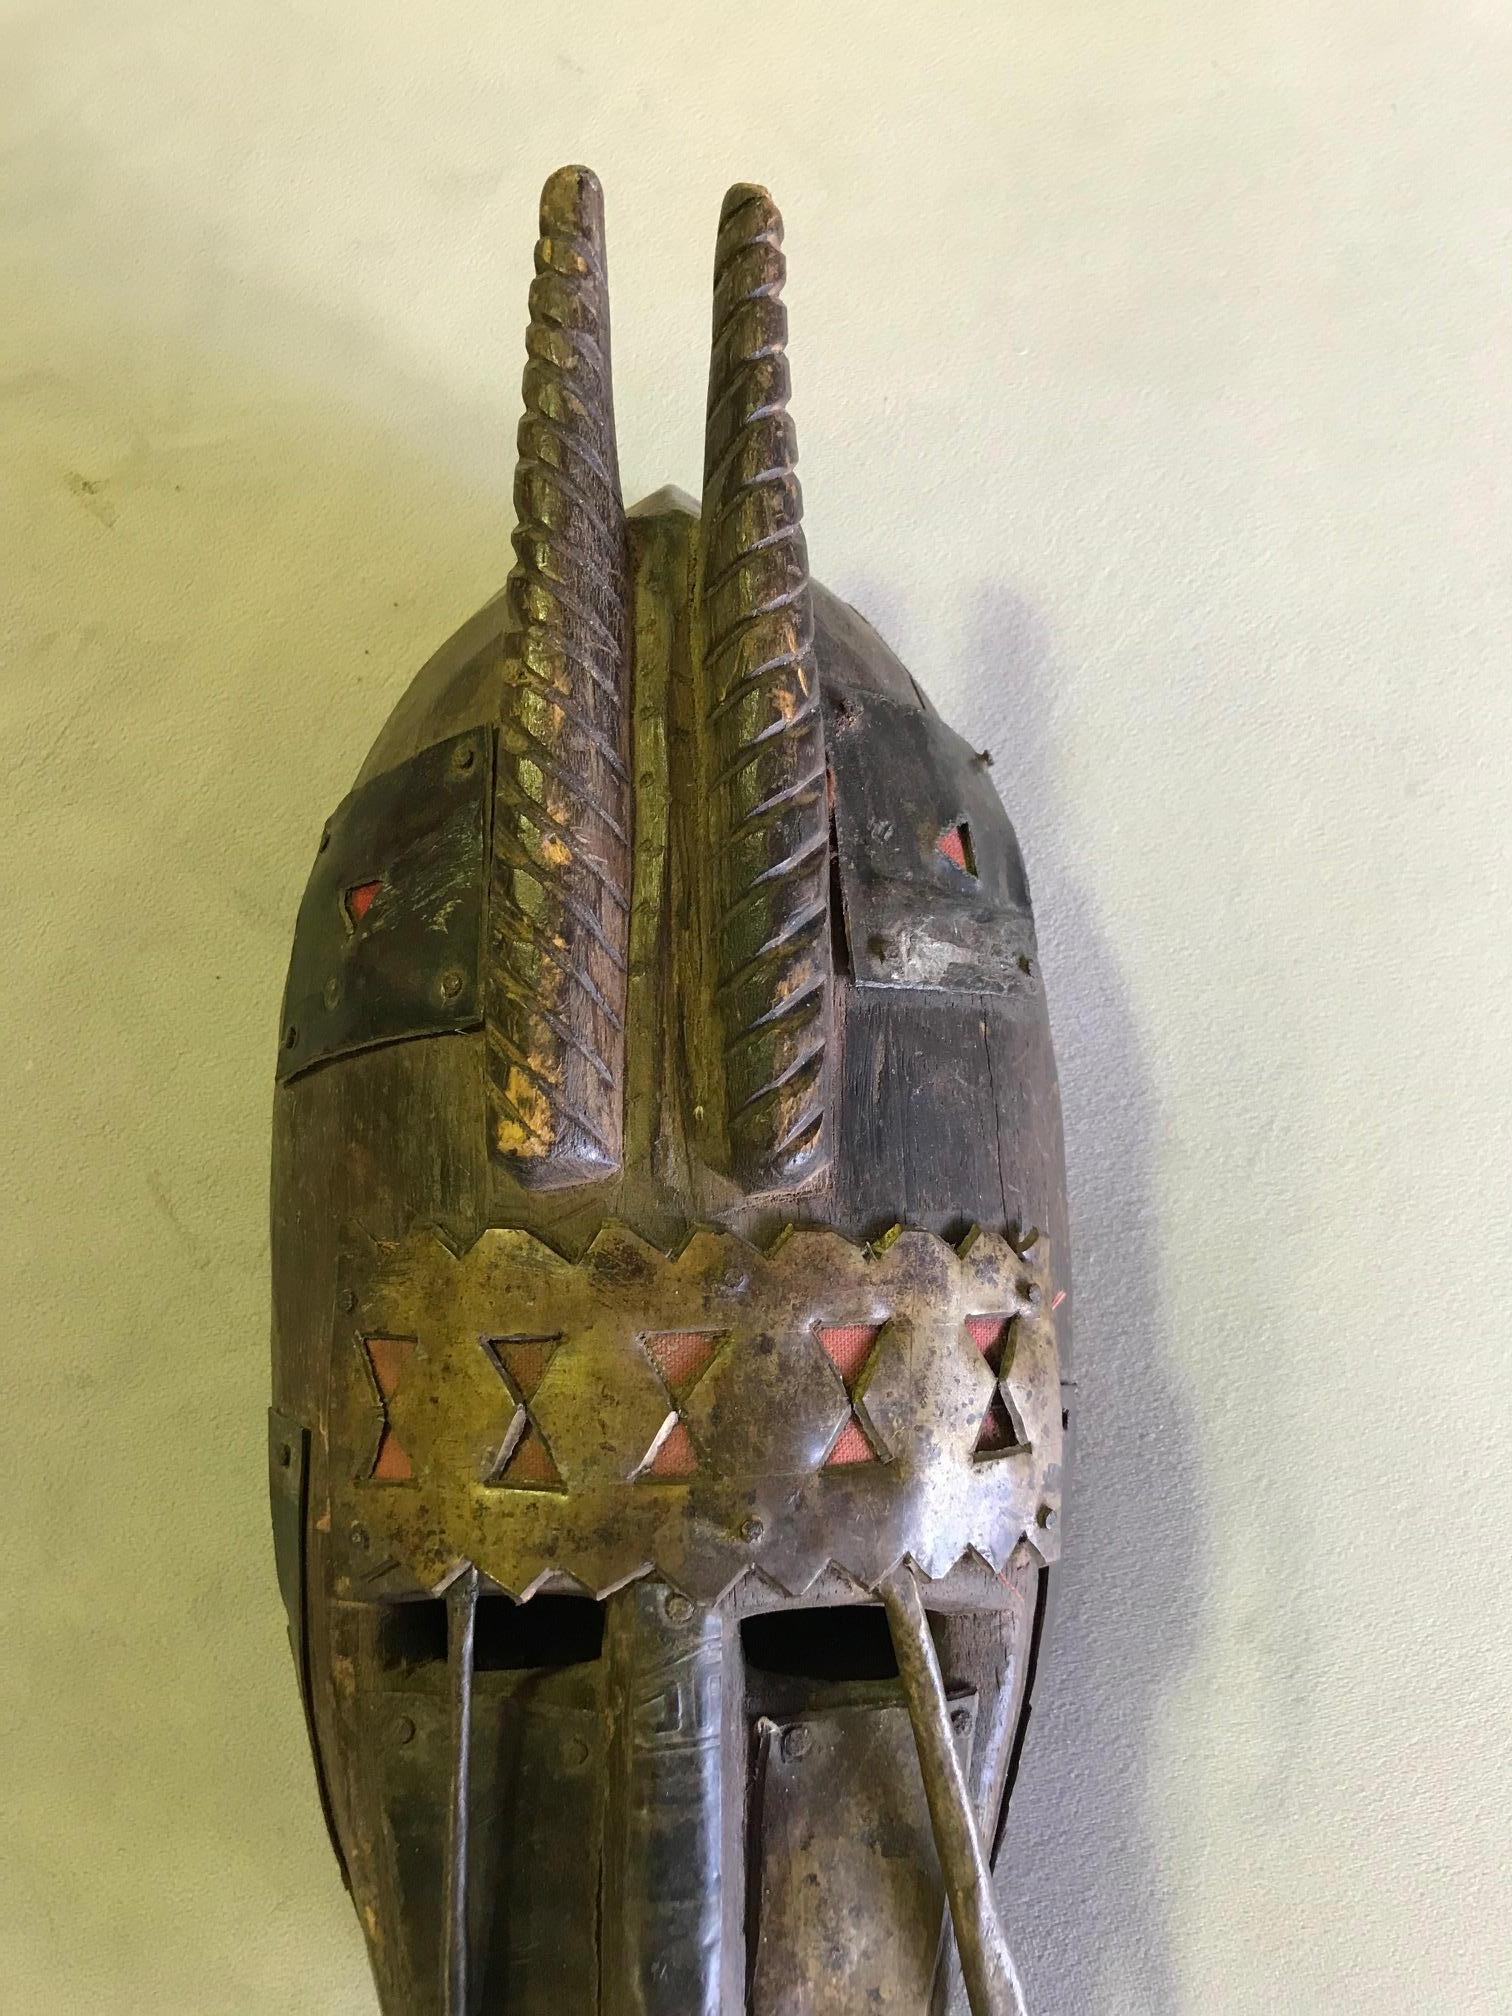 A fantastic mask. Warka masks are usually made of elongated carved wood and covered with copper. They are primarily used by the people of Mali in dances related to numerous societies. 

This mask has a beautiful patina acquired with some age and